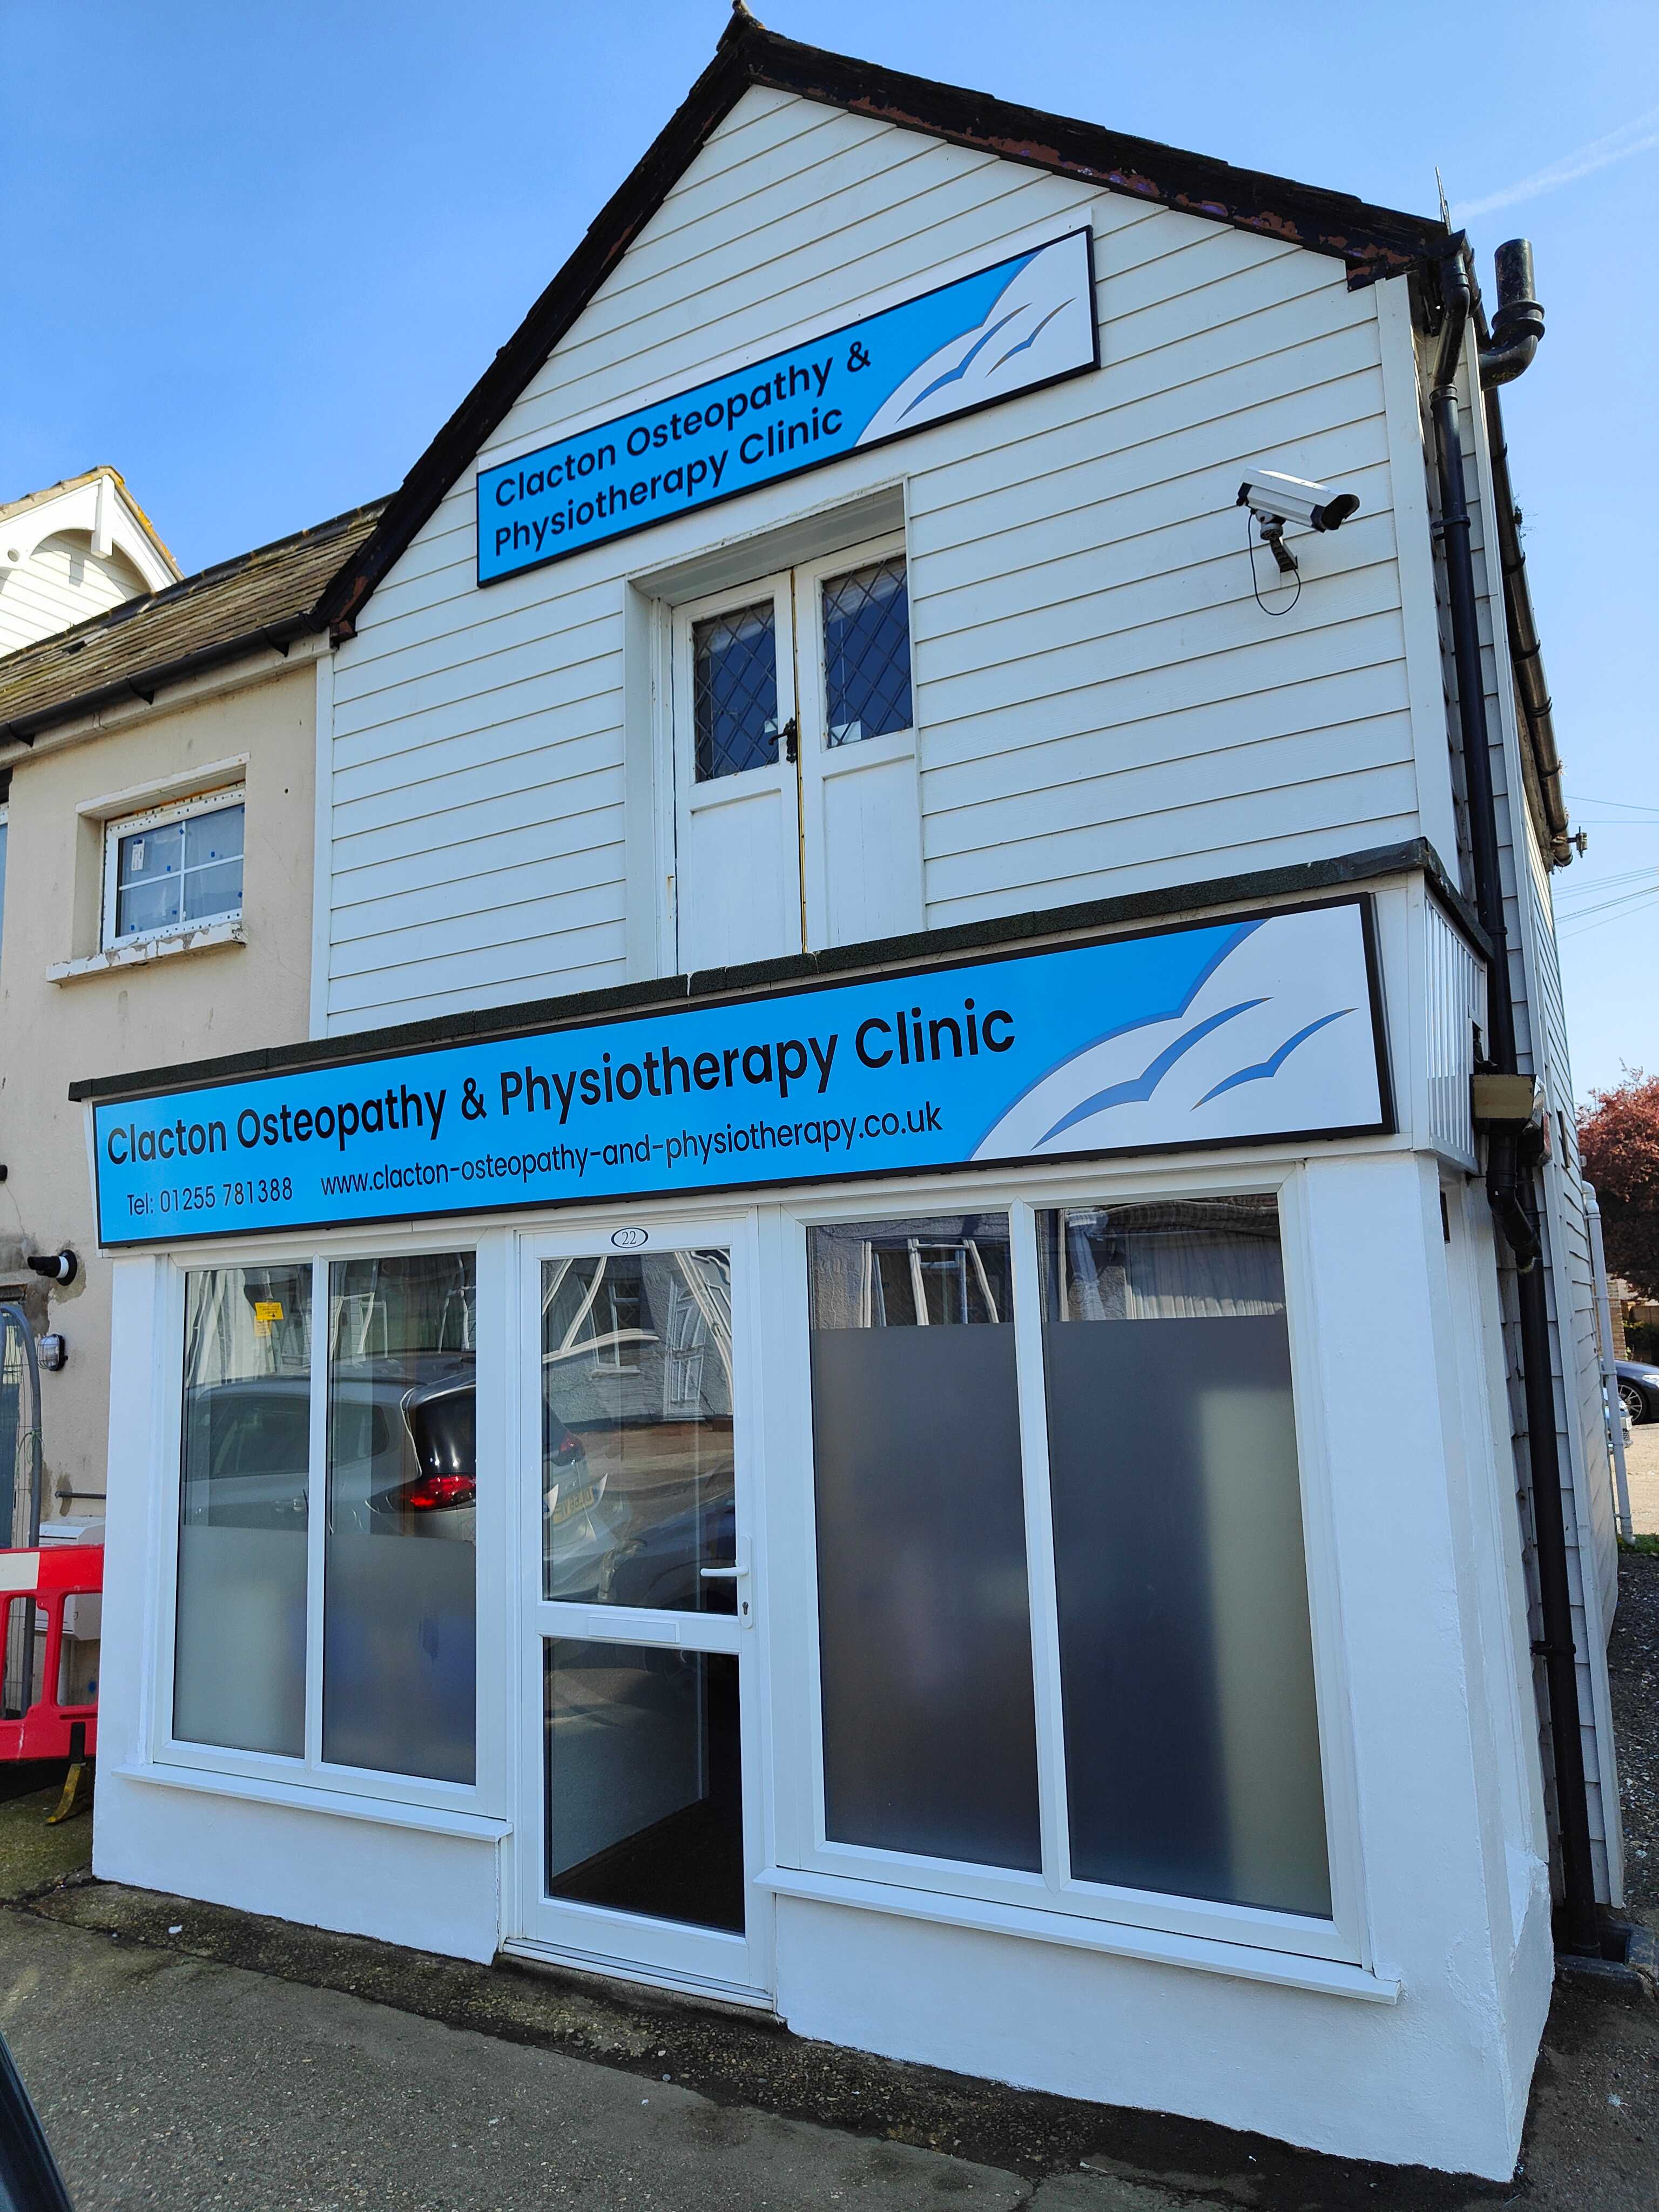 Picture of the exterior of Clacton Osteopathy & Physiotherapy clinic, with the clinic name displayed on the sign outside.